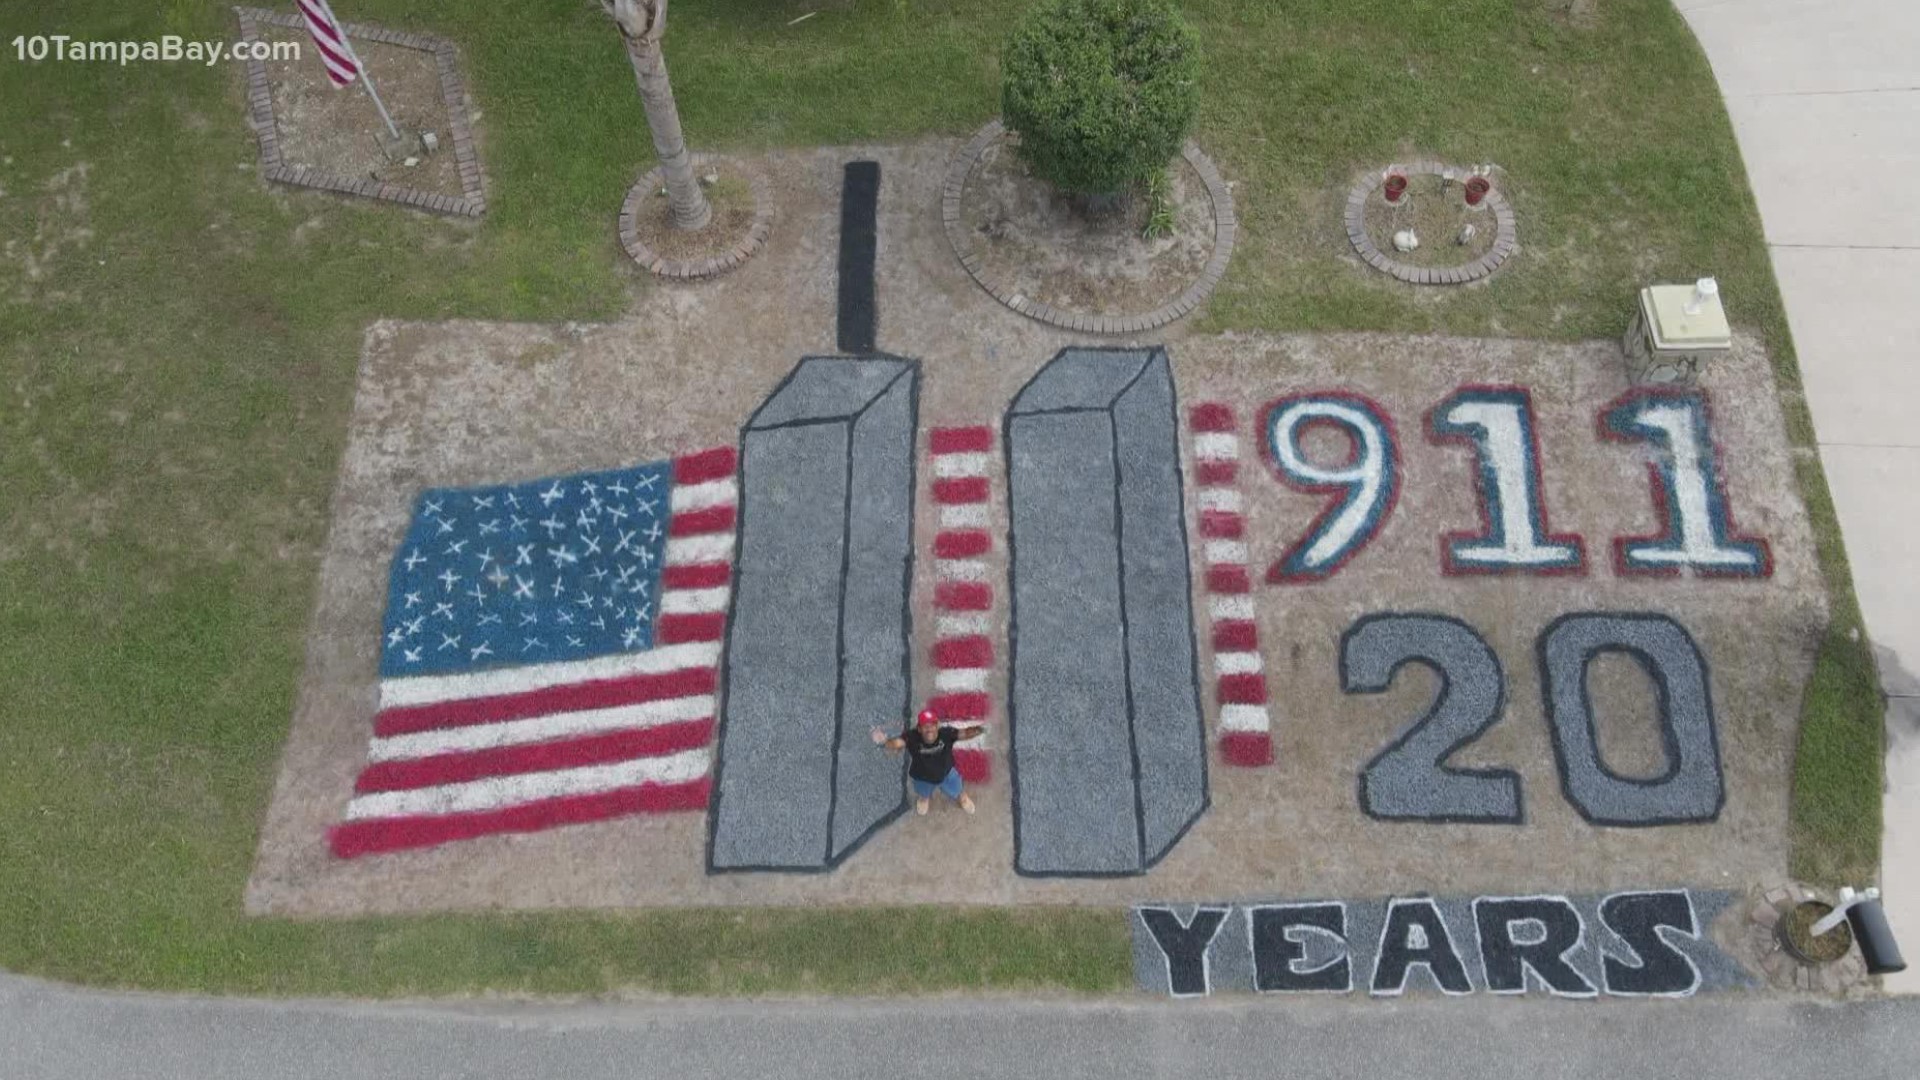 This is Diego Gomez's 15th year painting his lawn to lay respects to those who lost their lives on 9/11.